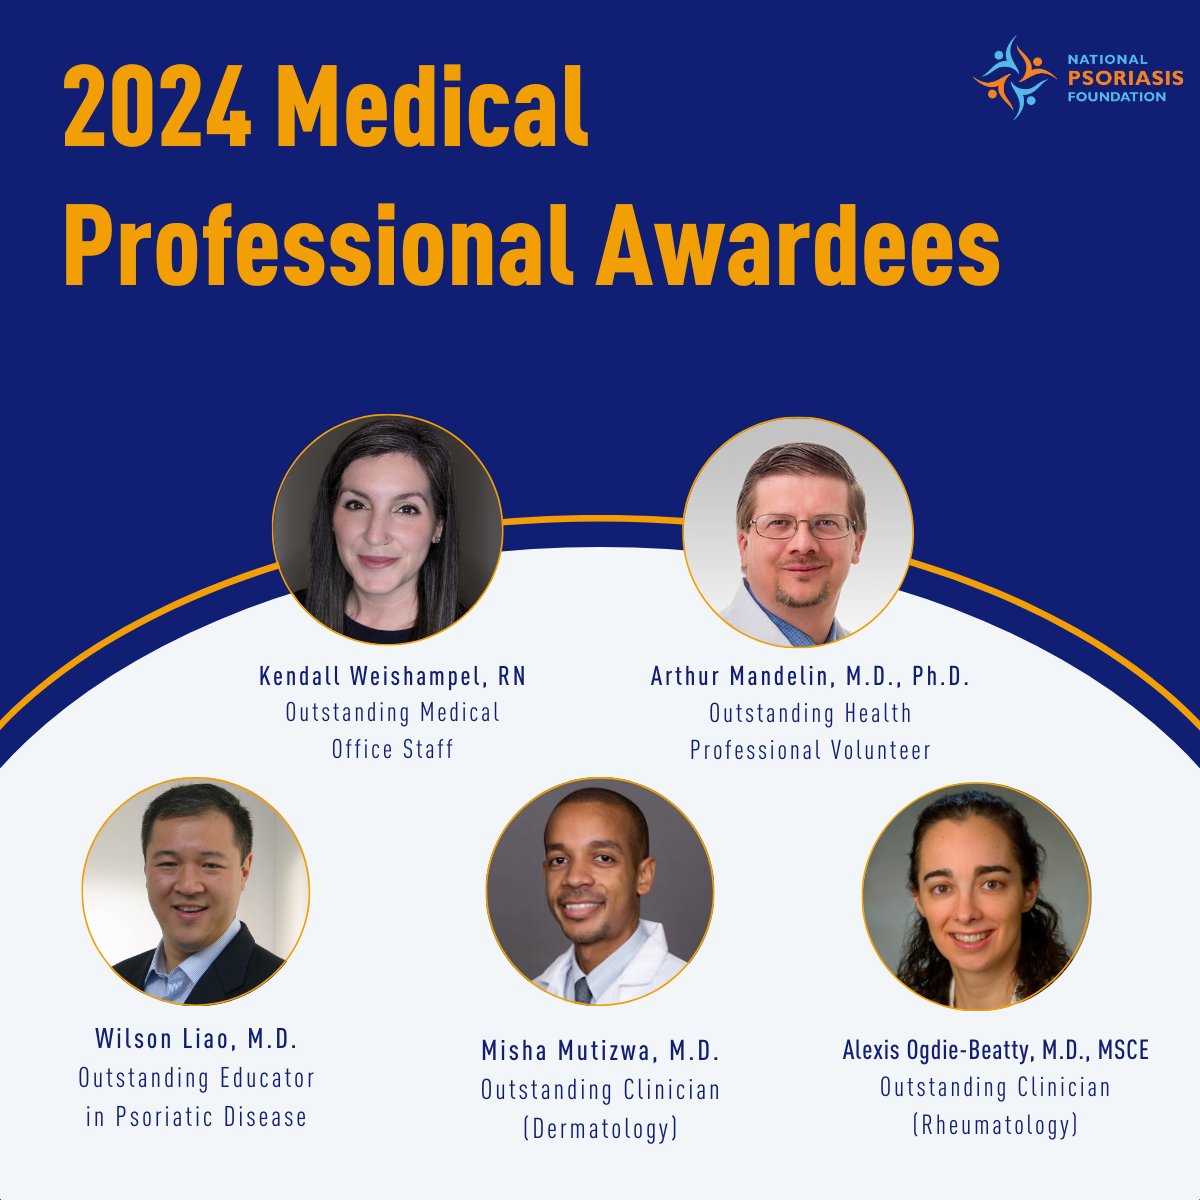 Congratulations to the recipients of the 2024 NPF Medical Professional Awards. These individuals exemplify excellence in advancing psoriatic disease care. Thank you for your dedication to improving lives through research, treatment, and education. psoriasis.org/medical-profes…